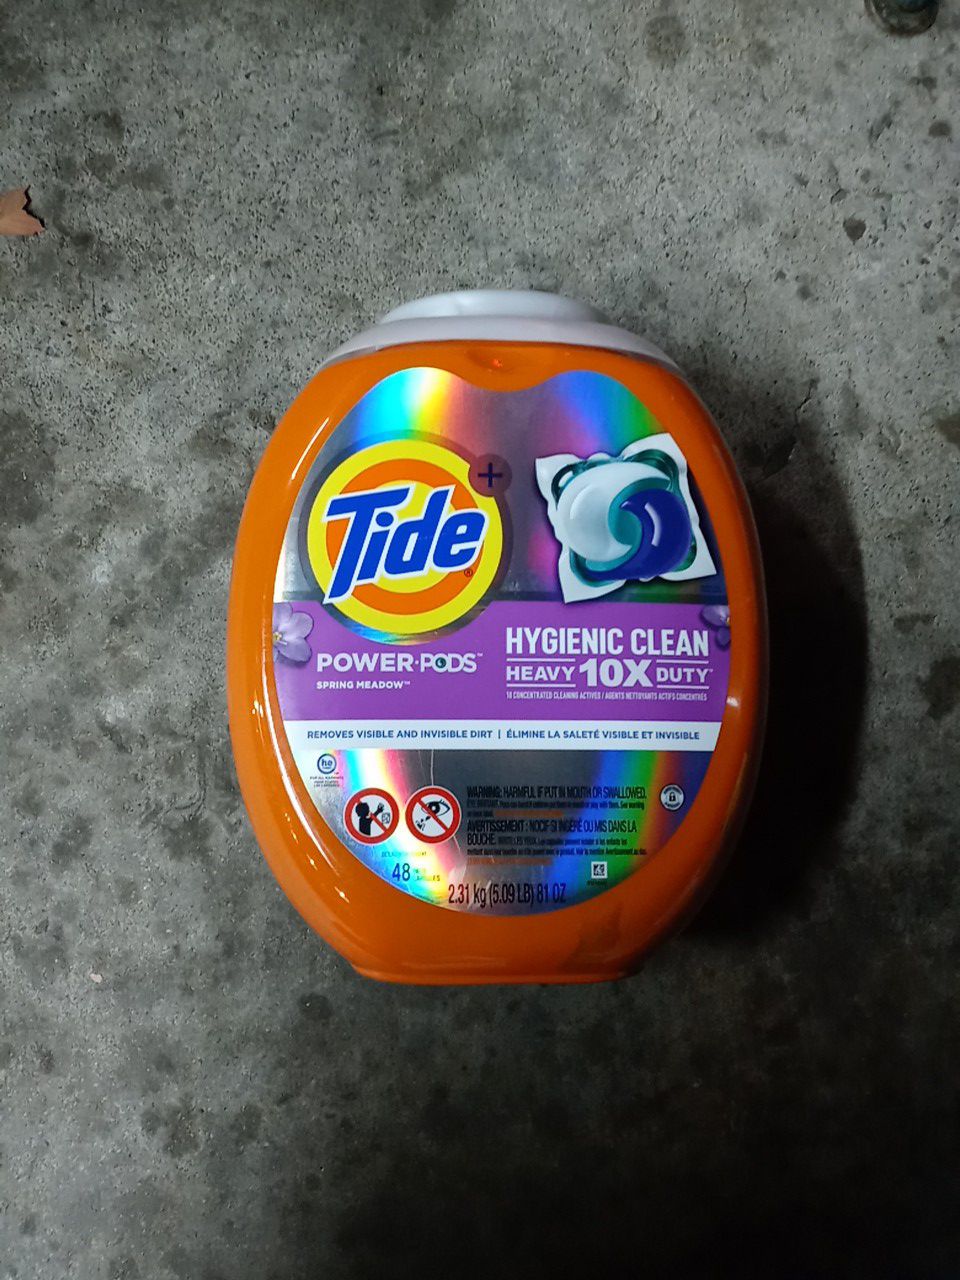 Tide power pods hygienic clean